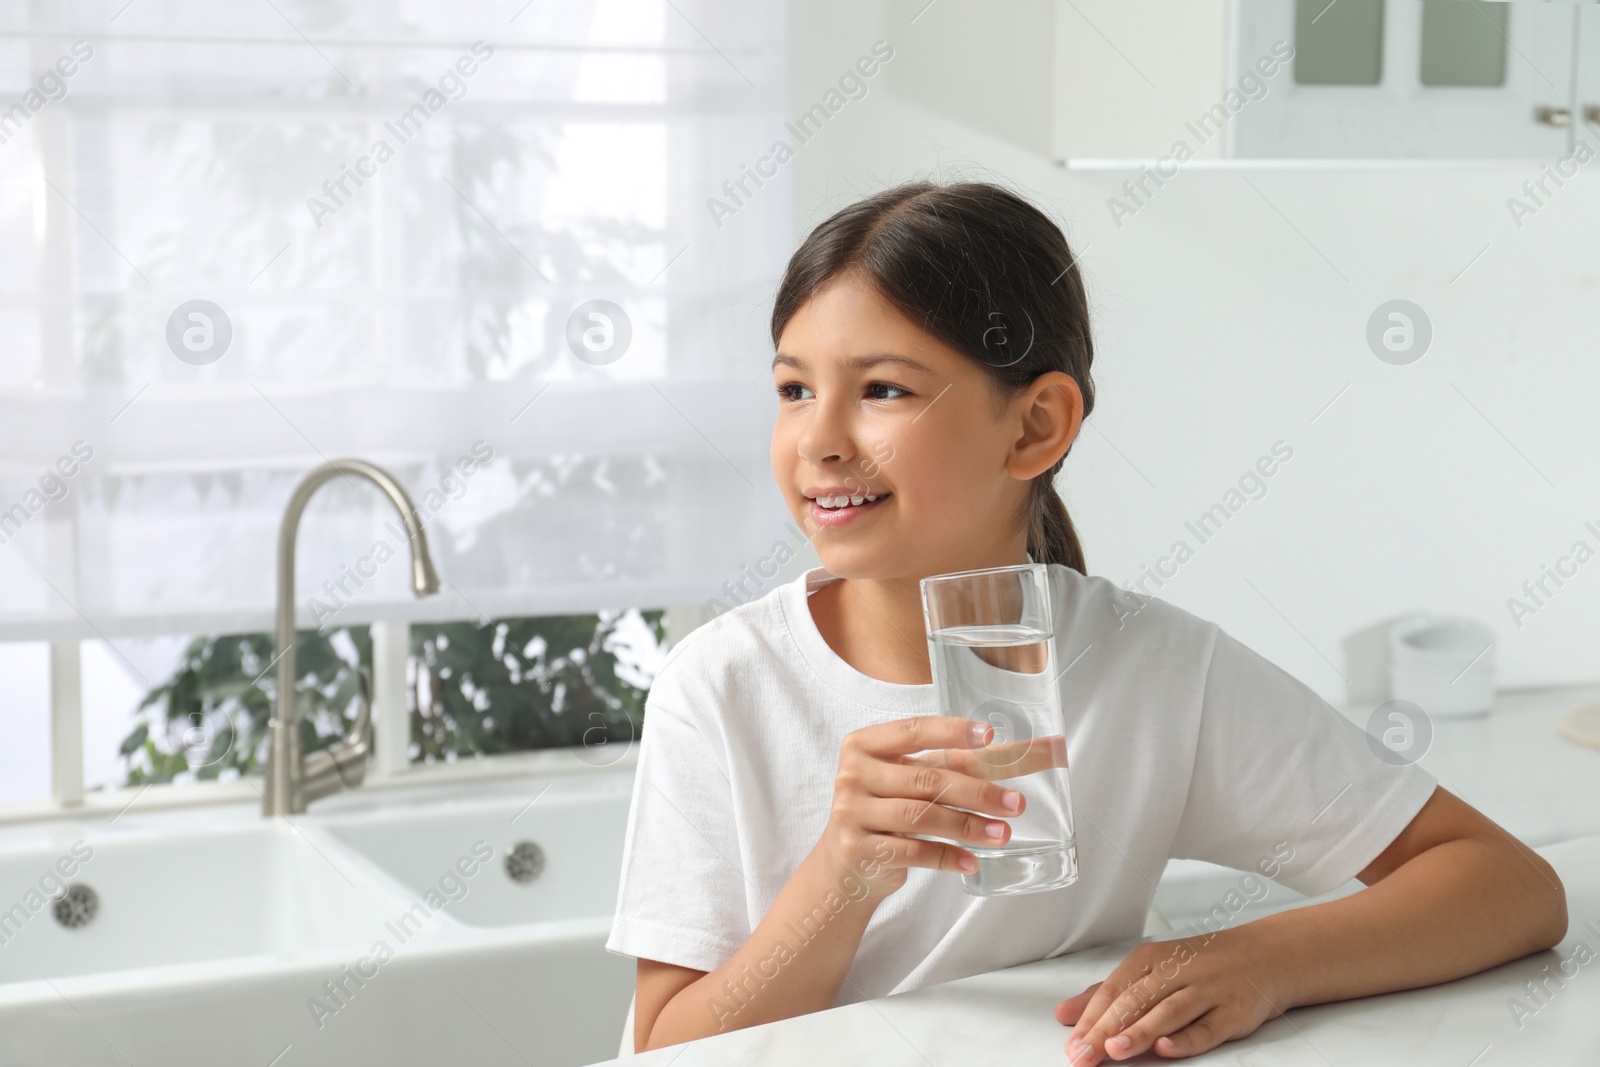 Photo of Girl with glass of tap water in kitchen